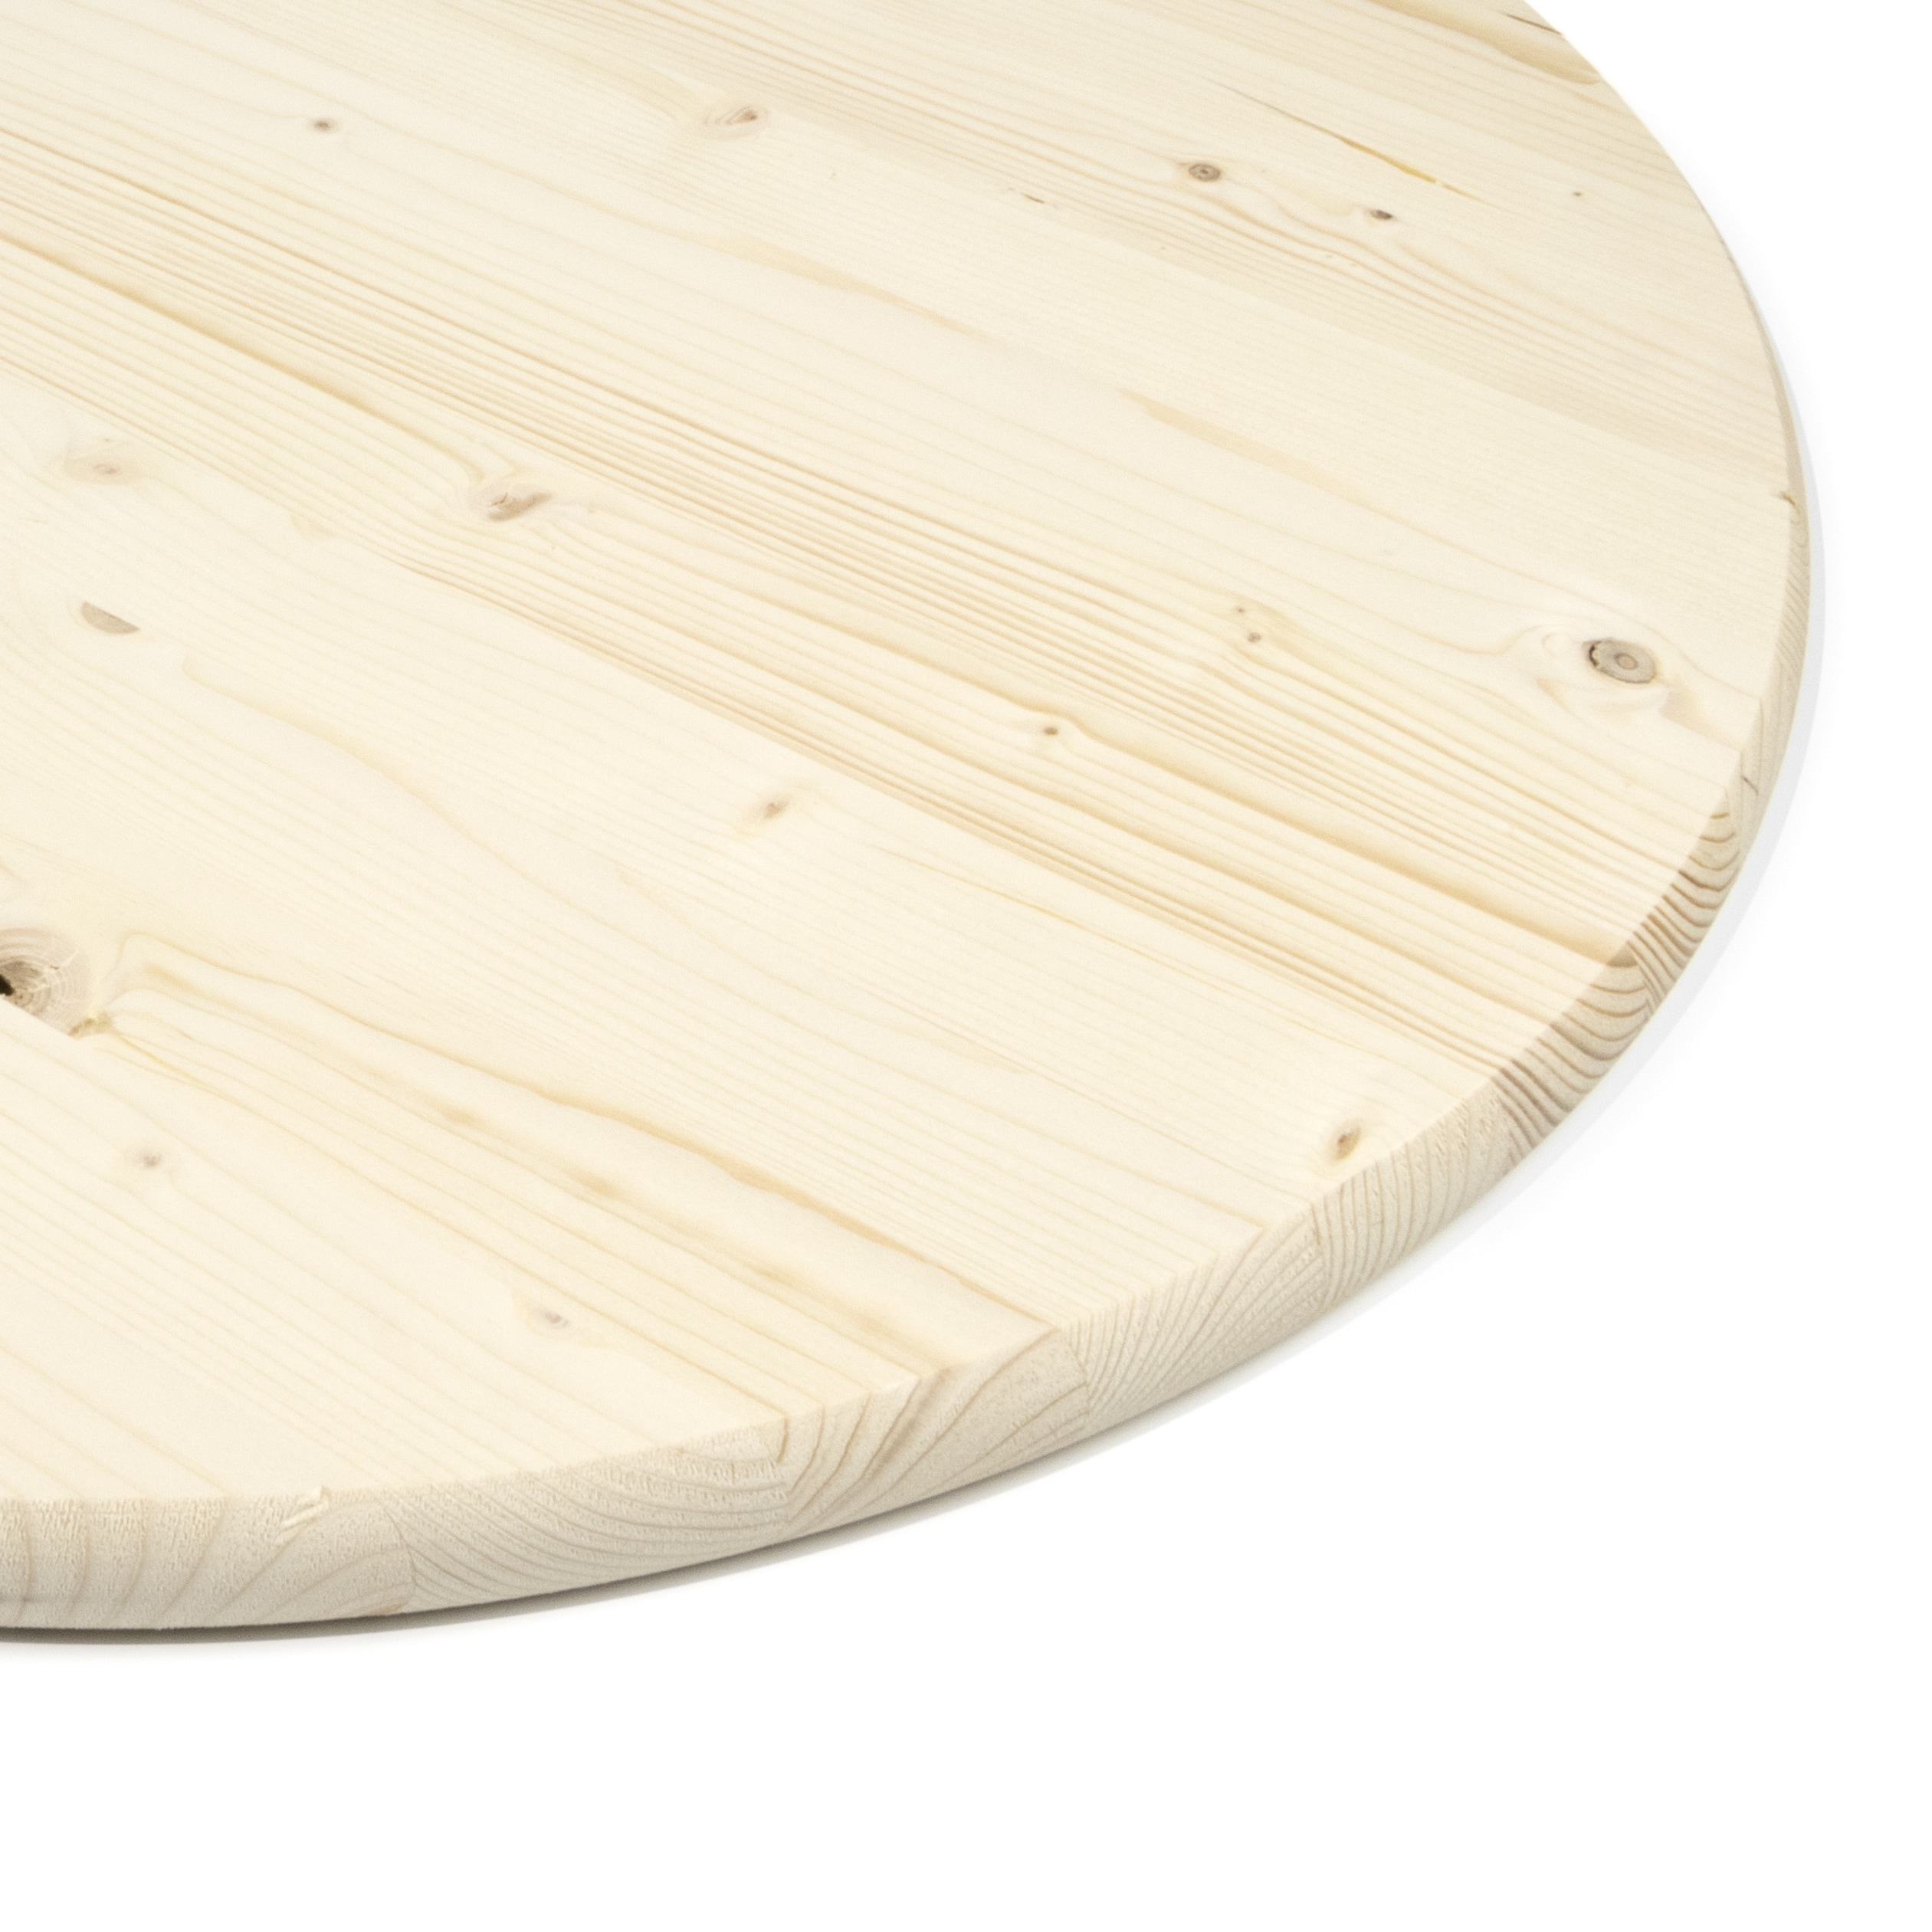 1x 36 Pine Round Table Top